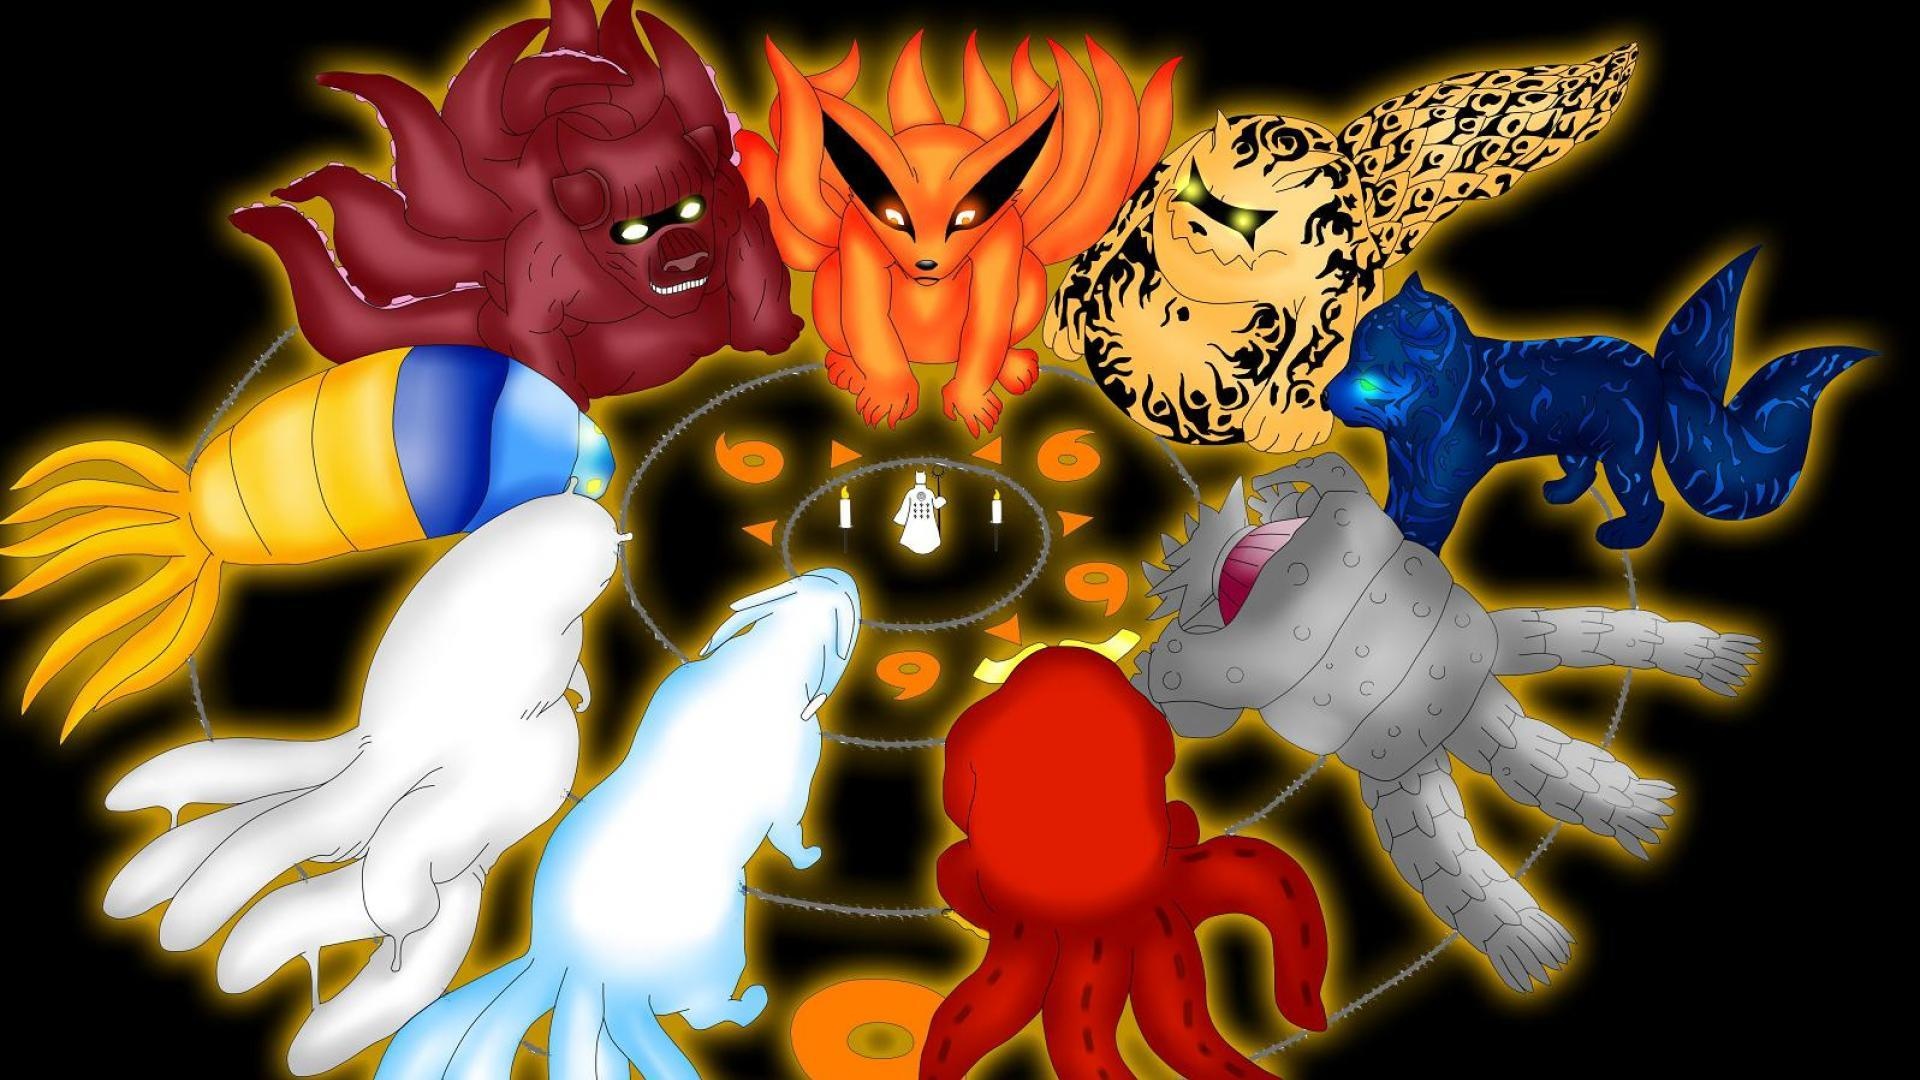 Tailed Beasts, Naruto anime, Tailed Beasts wallpapers, 1920x1080 Full HD Desktop